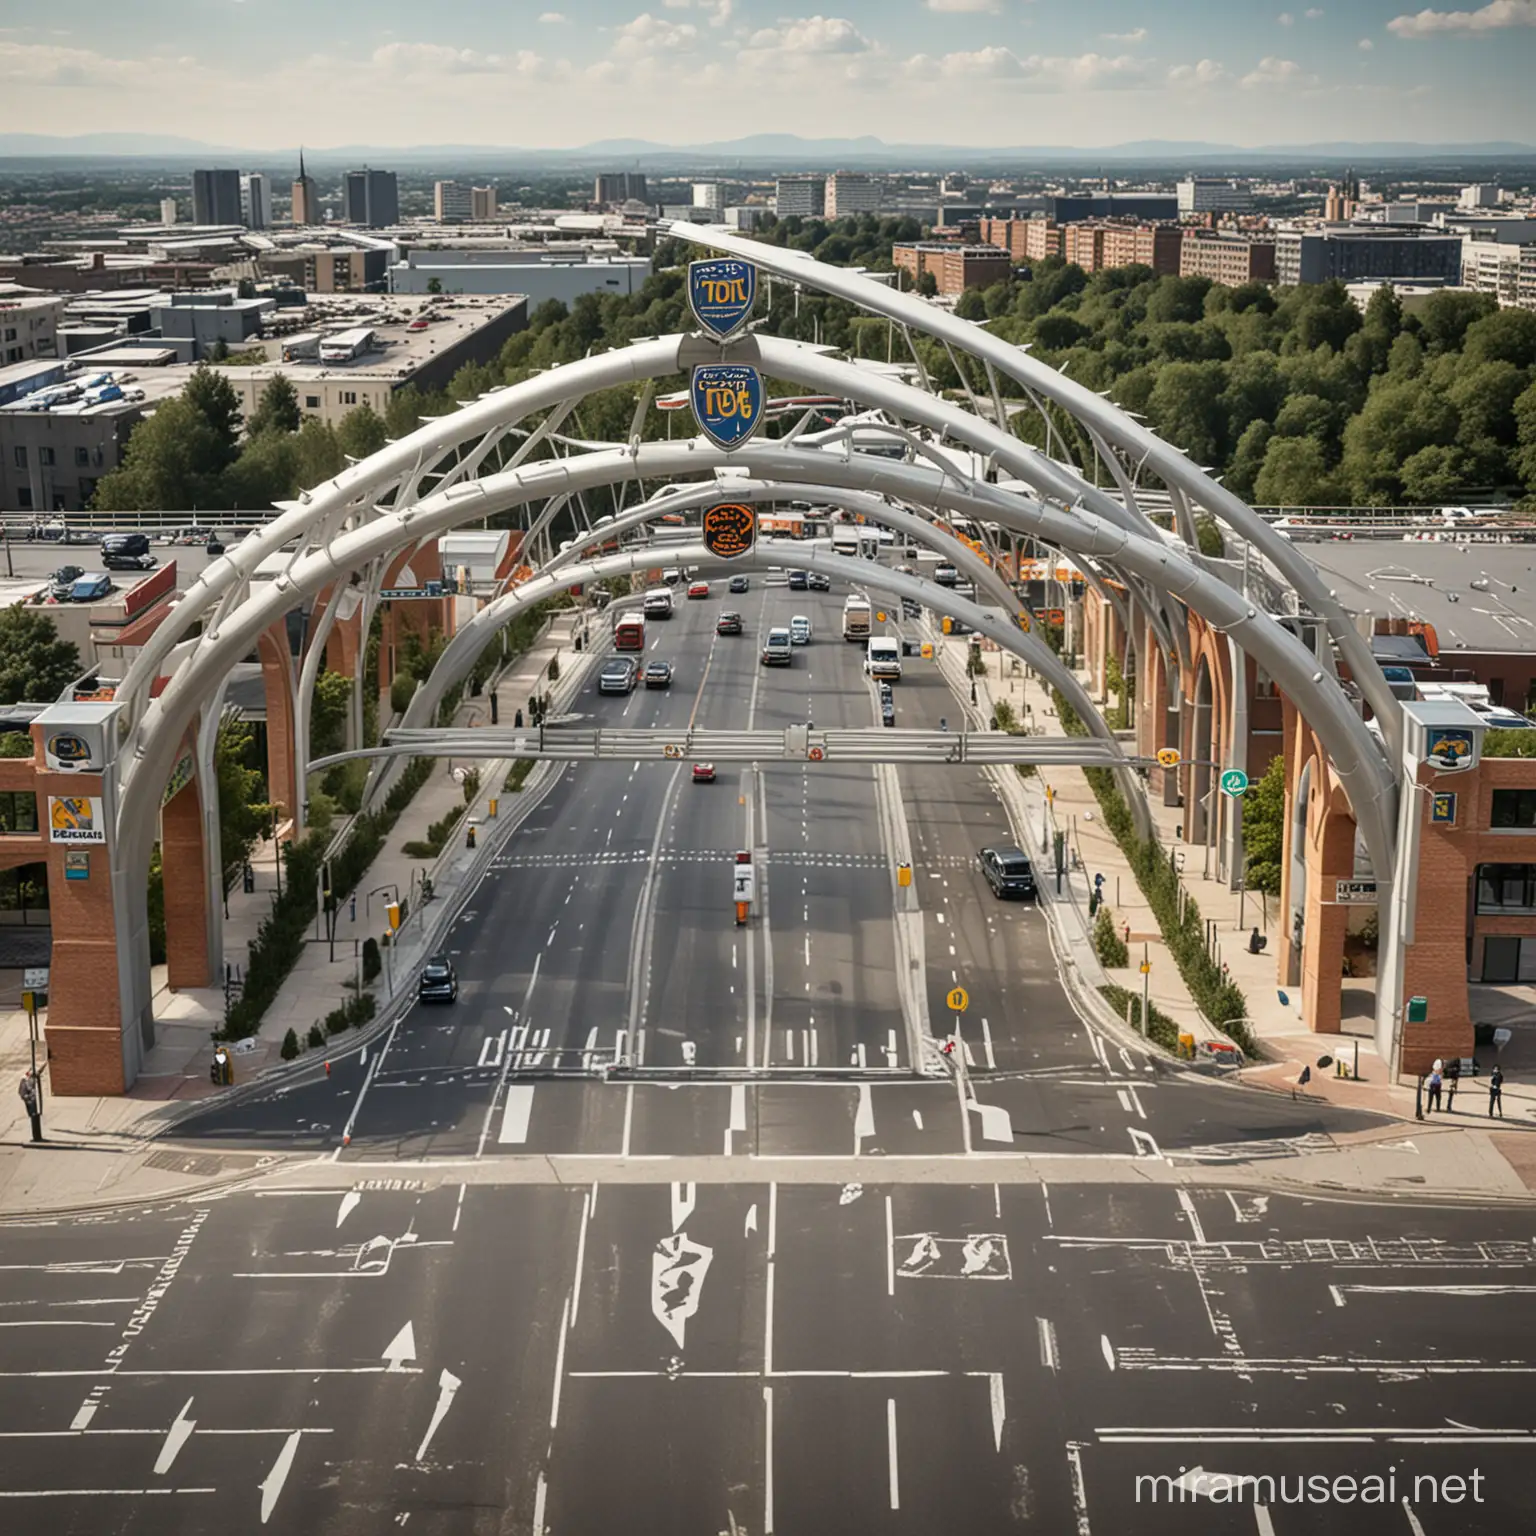 Designing an entrance gate for car tolls to enter the city, which includes cabins and cars, and is adapted from the shape of the Charity Arches and the shield
